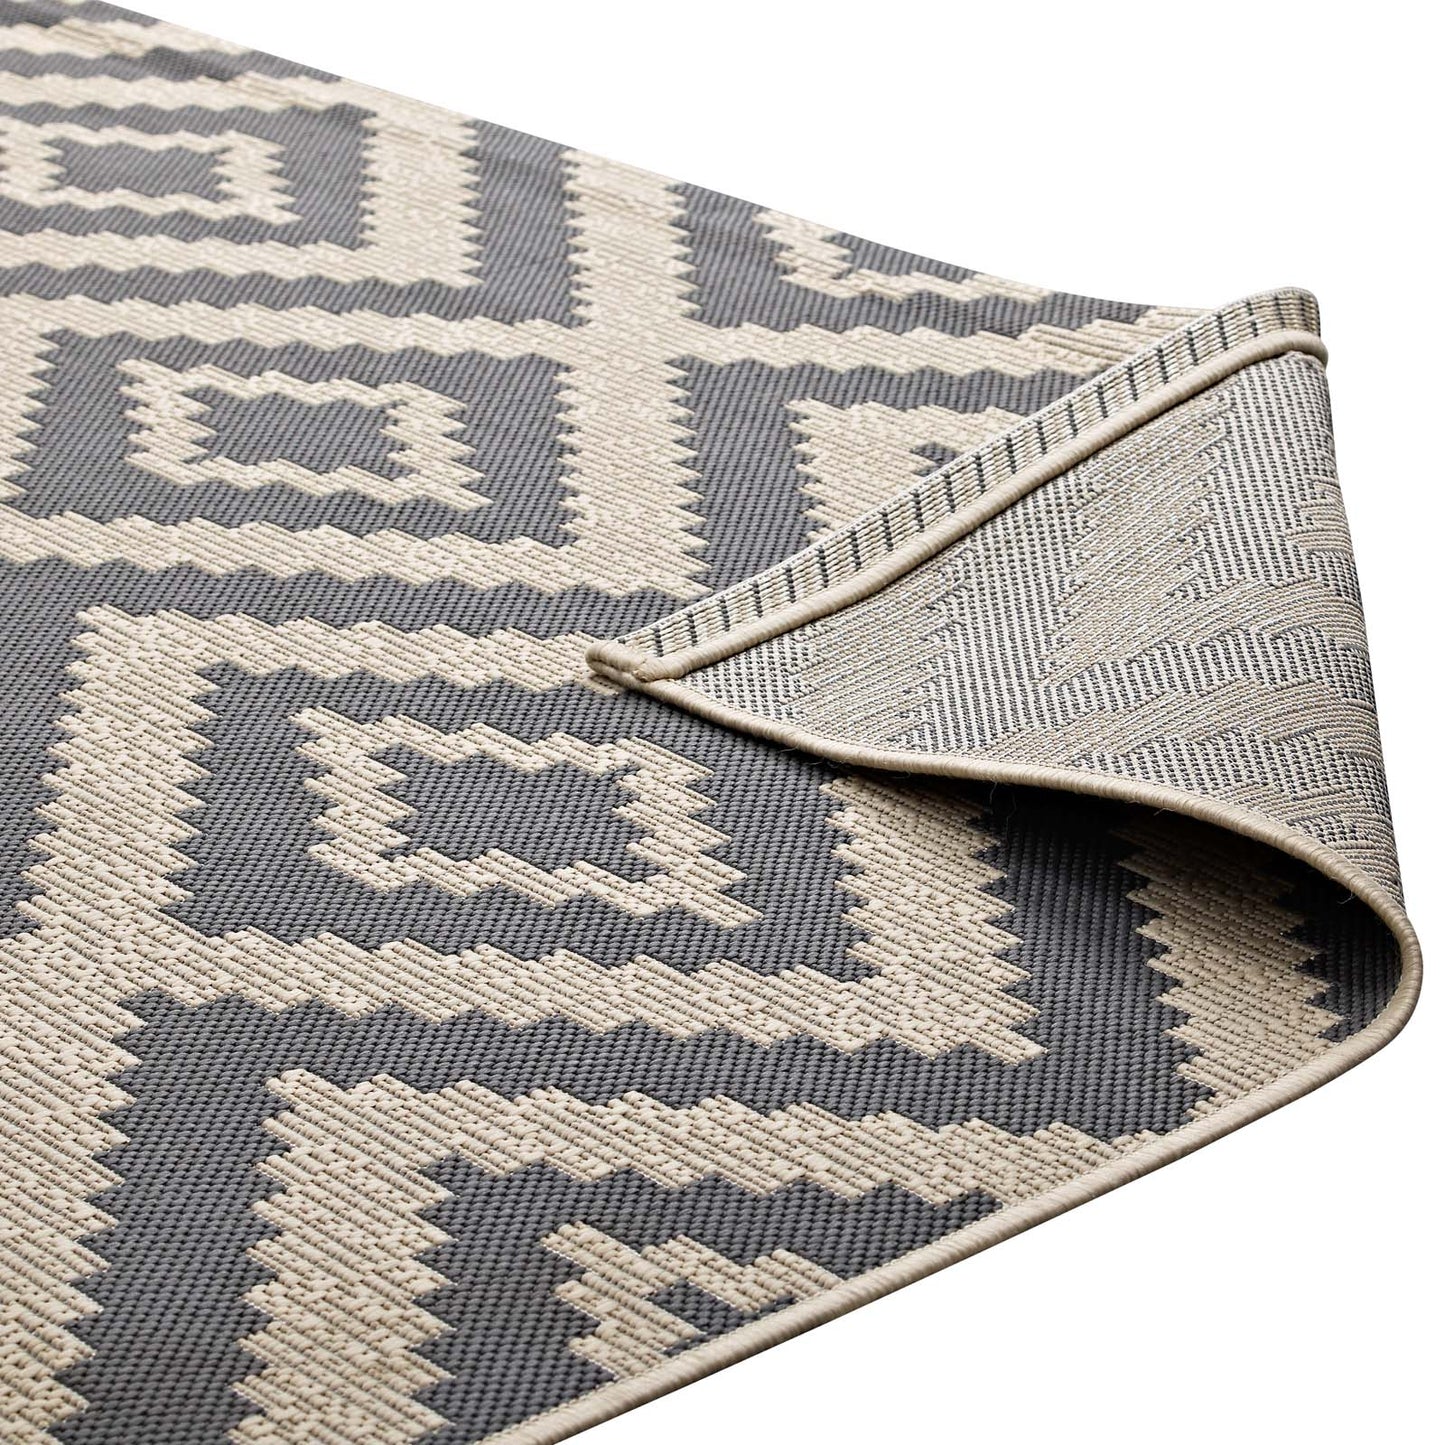 Jagged Geometric Diamond Trellis 9x12 Indoor and Outdoor Area Rug Gray and Beige R-1135A-912